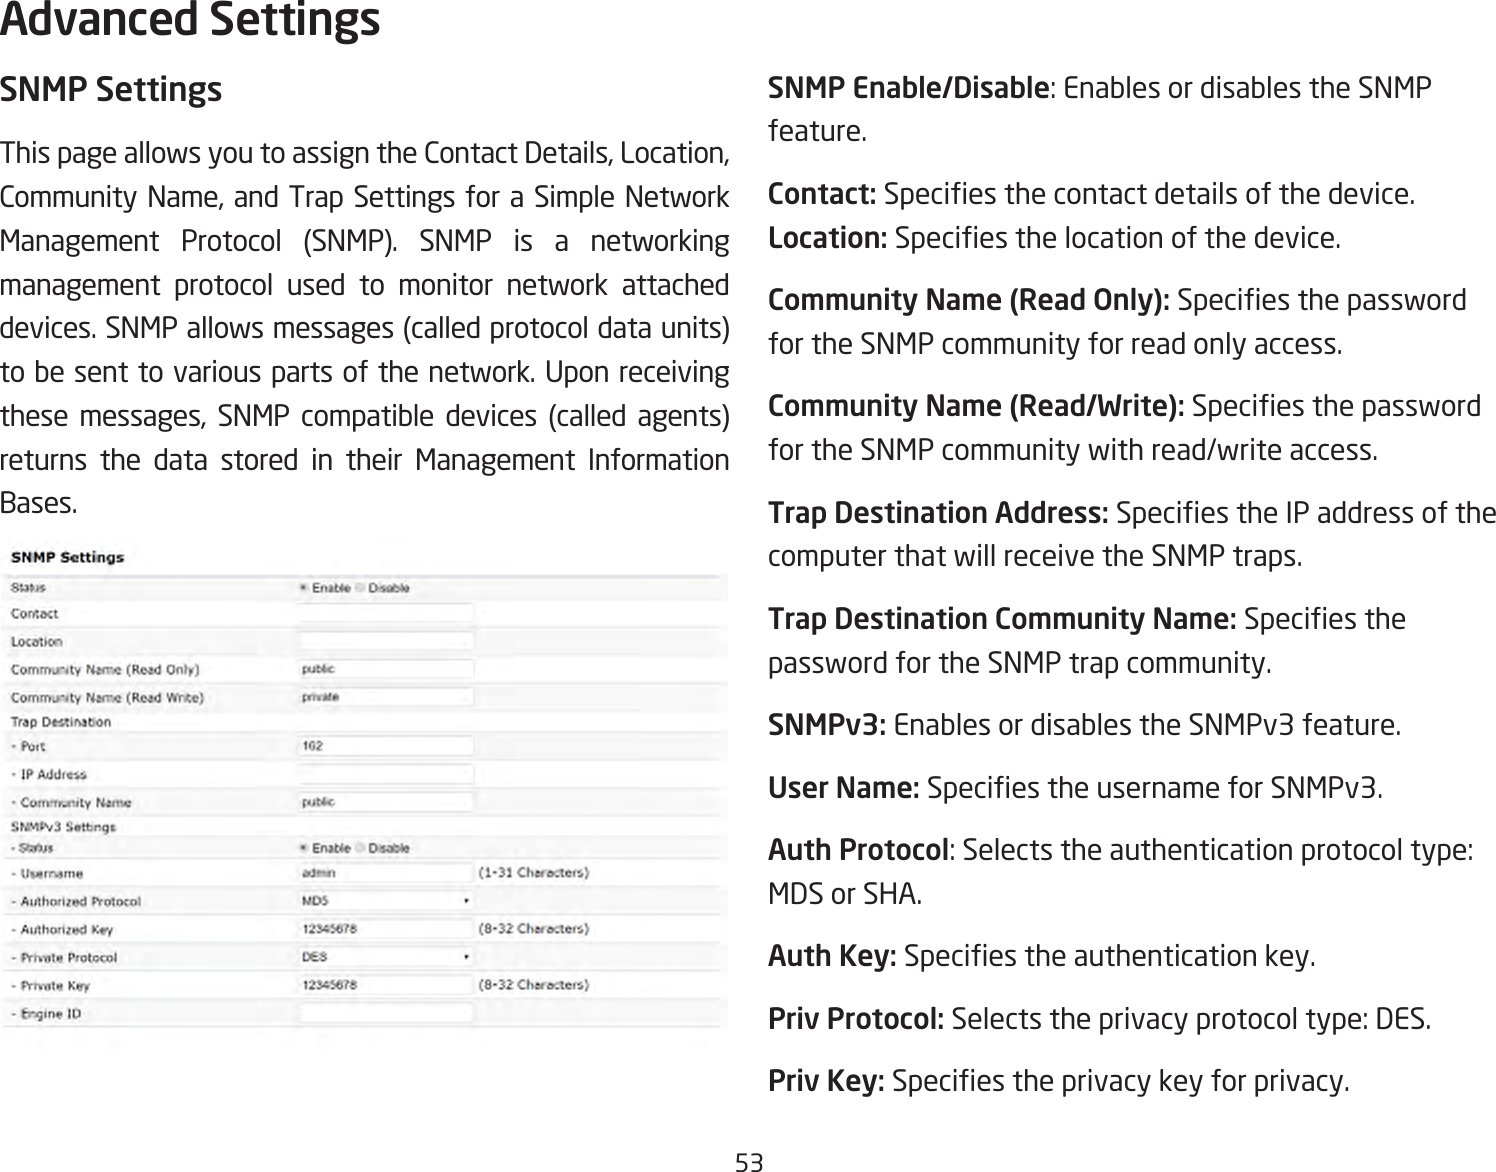 53SNMP SettingsThis page allows you to assign the Contact Details, Location, Community Name, and Trap Settings for a Simple Network Management Protocol (SNMP). SNMP is a networking management protocol used to monitor network attached devices. SNMP allows messages (called protocol data units) tobesenttovariousparts ofthenetwork.Uponreceivingthese messages, SNMP compatible devices (called agents) returns the data stored in their Management Information Bases.SNMP Enable/Disable: Enables or disables the SNMP feature.Contact: Speciesthecontactdetailsofthedevice.Location: Speciesthelocationofthedevice.Community Name (Read Only): Speciesthepasswordfor the SNMP community for read only access.Community Name (Read/Write):Speciesthepasswordfor the SNMP community with read/write access.Trap Destination Address:SpeciestheIPaddressofthecomputer that will receive the SNMP traps.Trap Destination Community Name: Speciesthepassword for the SNMP trap community.SNMPv3: Enables or disables the SNMPv3 feature.User Name:SpeciestheusernameforSNMPv3.Auth Protocol: Selects the authentication protocol type: MDS or SHA.Auth Key: Speciestheauthenticationkey.Priv Protocol: Selects the privacy protocol type: DES.Priv Key: Speciestheprivacykeyforprivacy.Advanced Settings